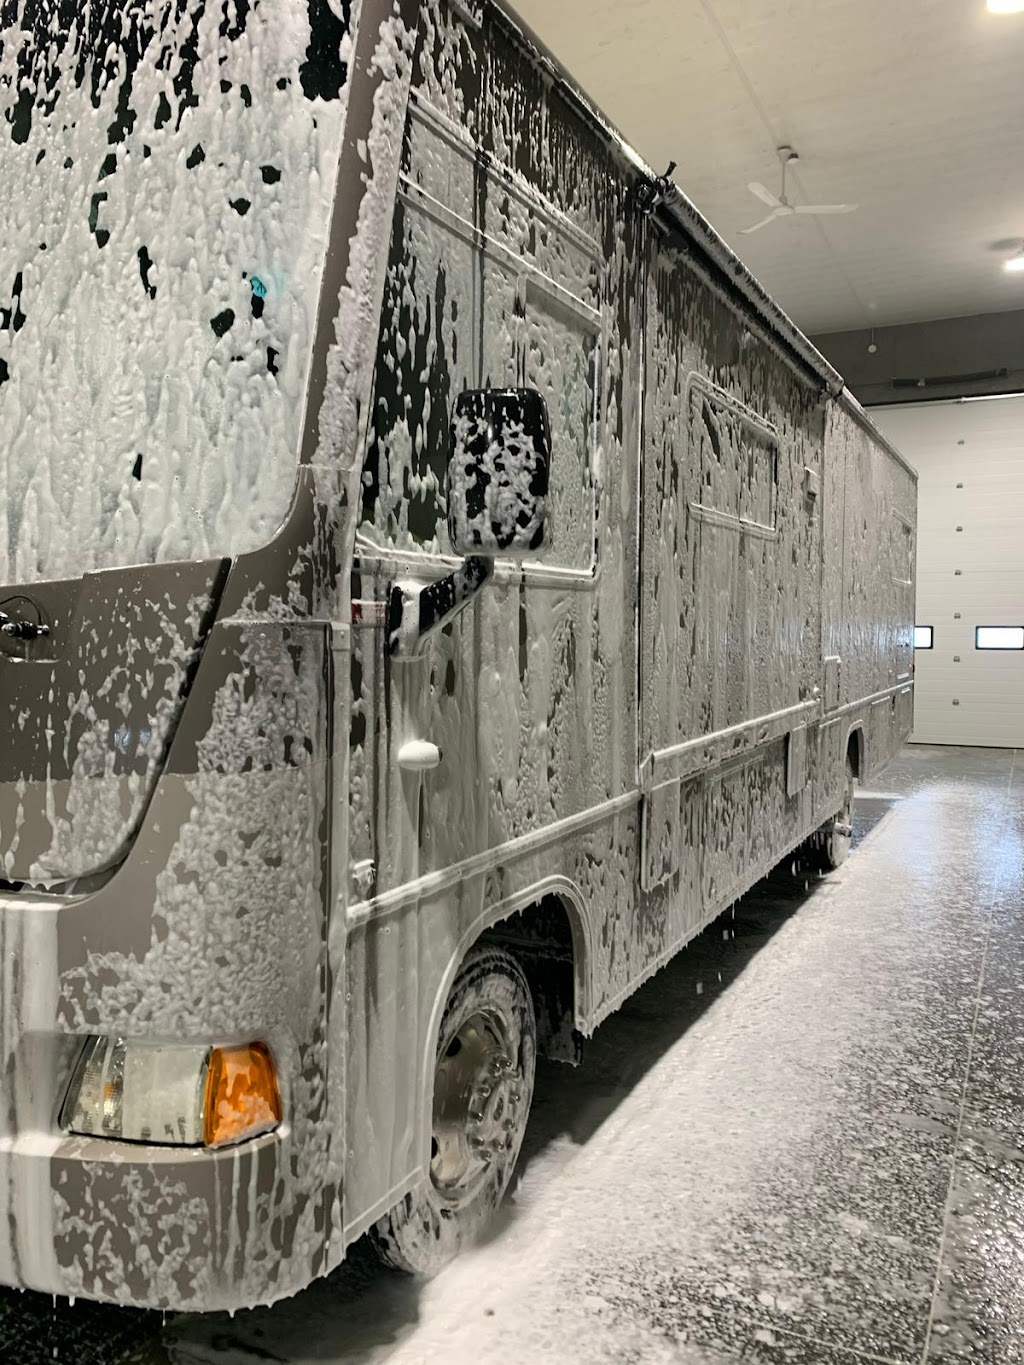 Supersuds Truckwash | 105 13th St, Nobleford, AB T0L 1S0, Canada | Phone: (403) 849-0937